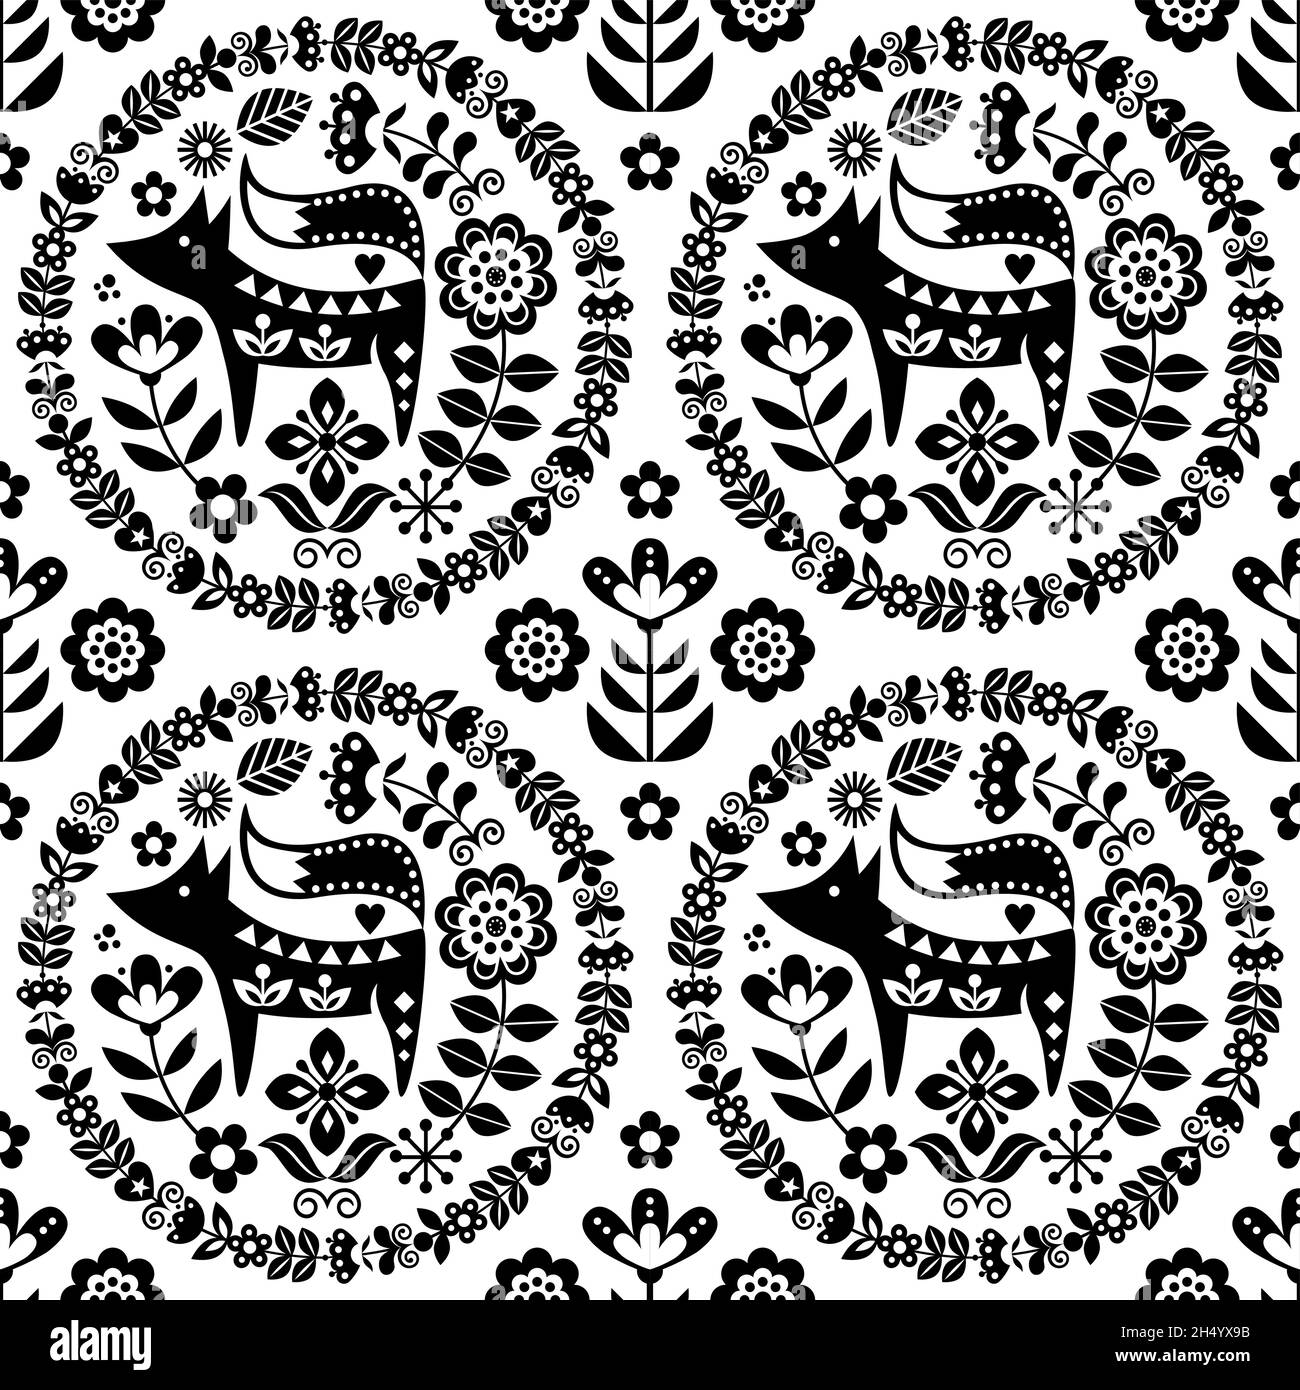 Scandinavian cute folk art vector seamless pattern with flowers and fox, black floral textile ornament inspired by traditional embroidery from Sweden, Stock Vector